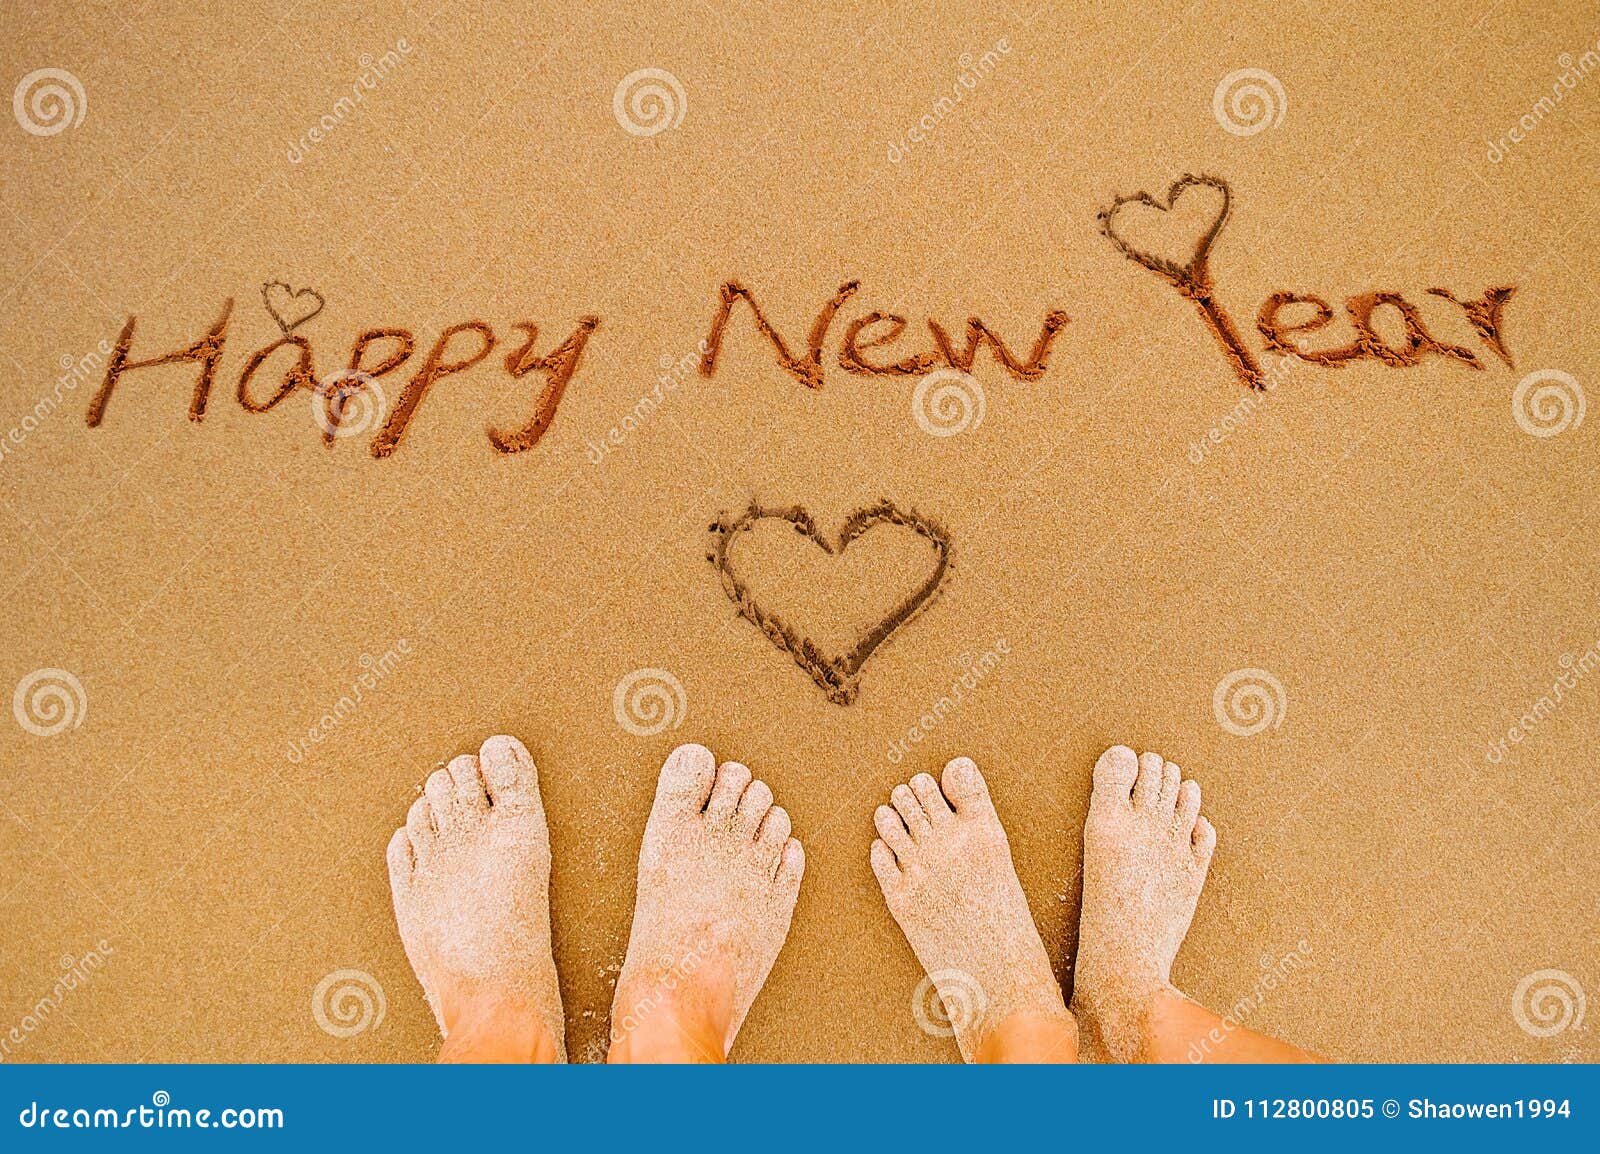 Happy New Year and Lover Feet on Beach Stock Image - Image of feet ...